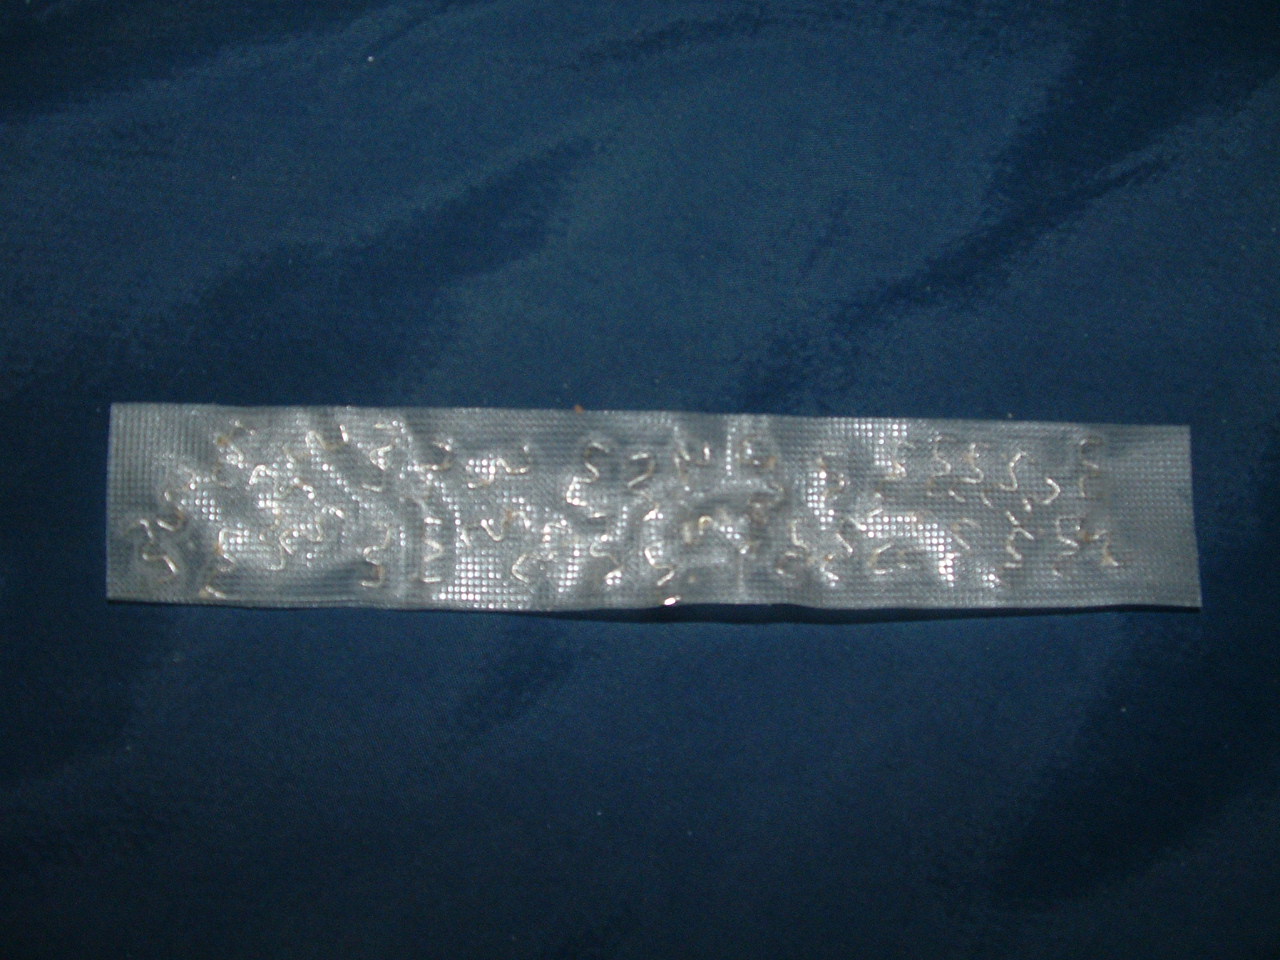 Eventually I got them out though, I still have this piece of tape containing them, it looks like this